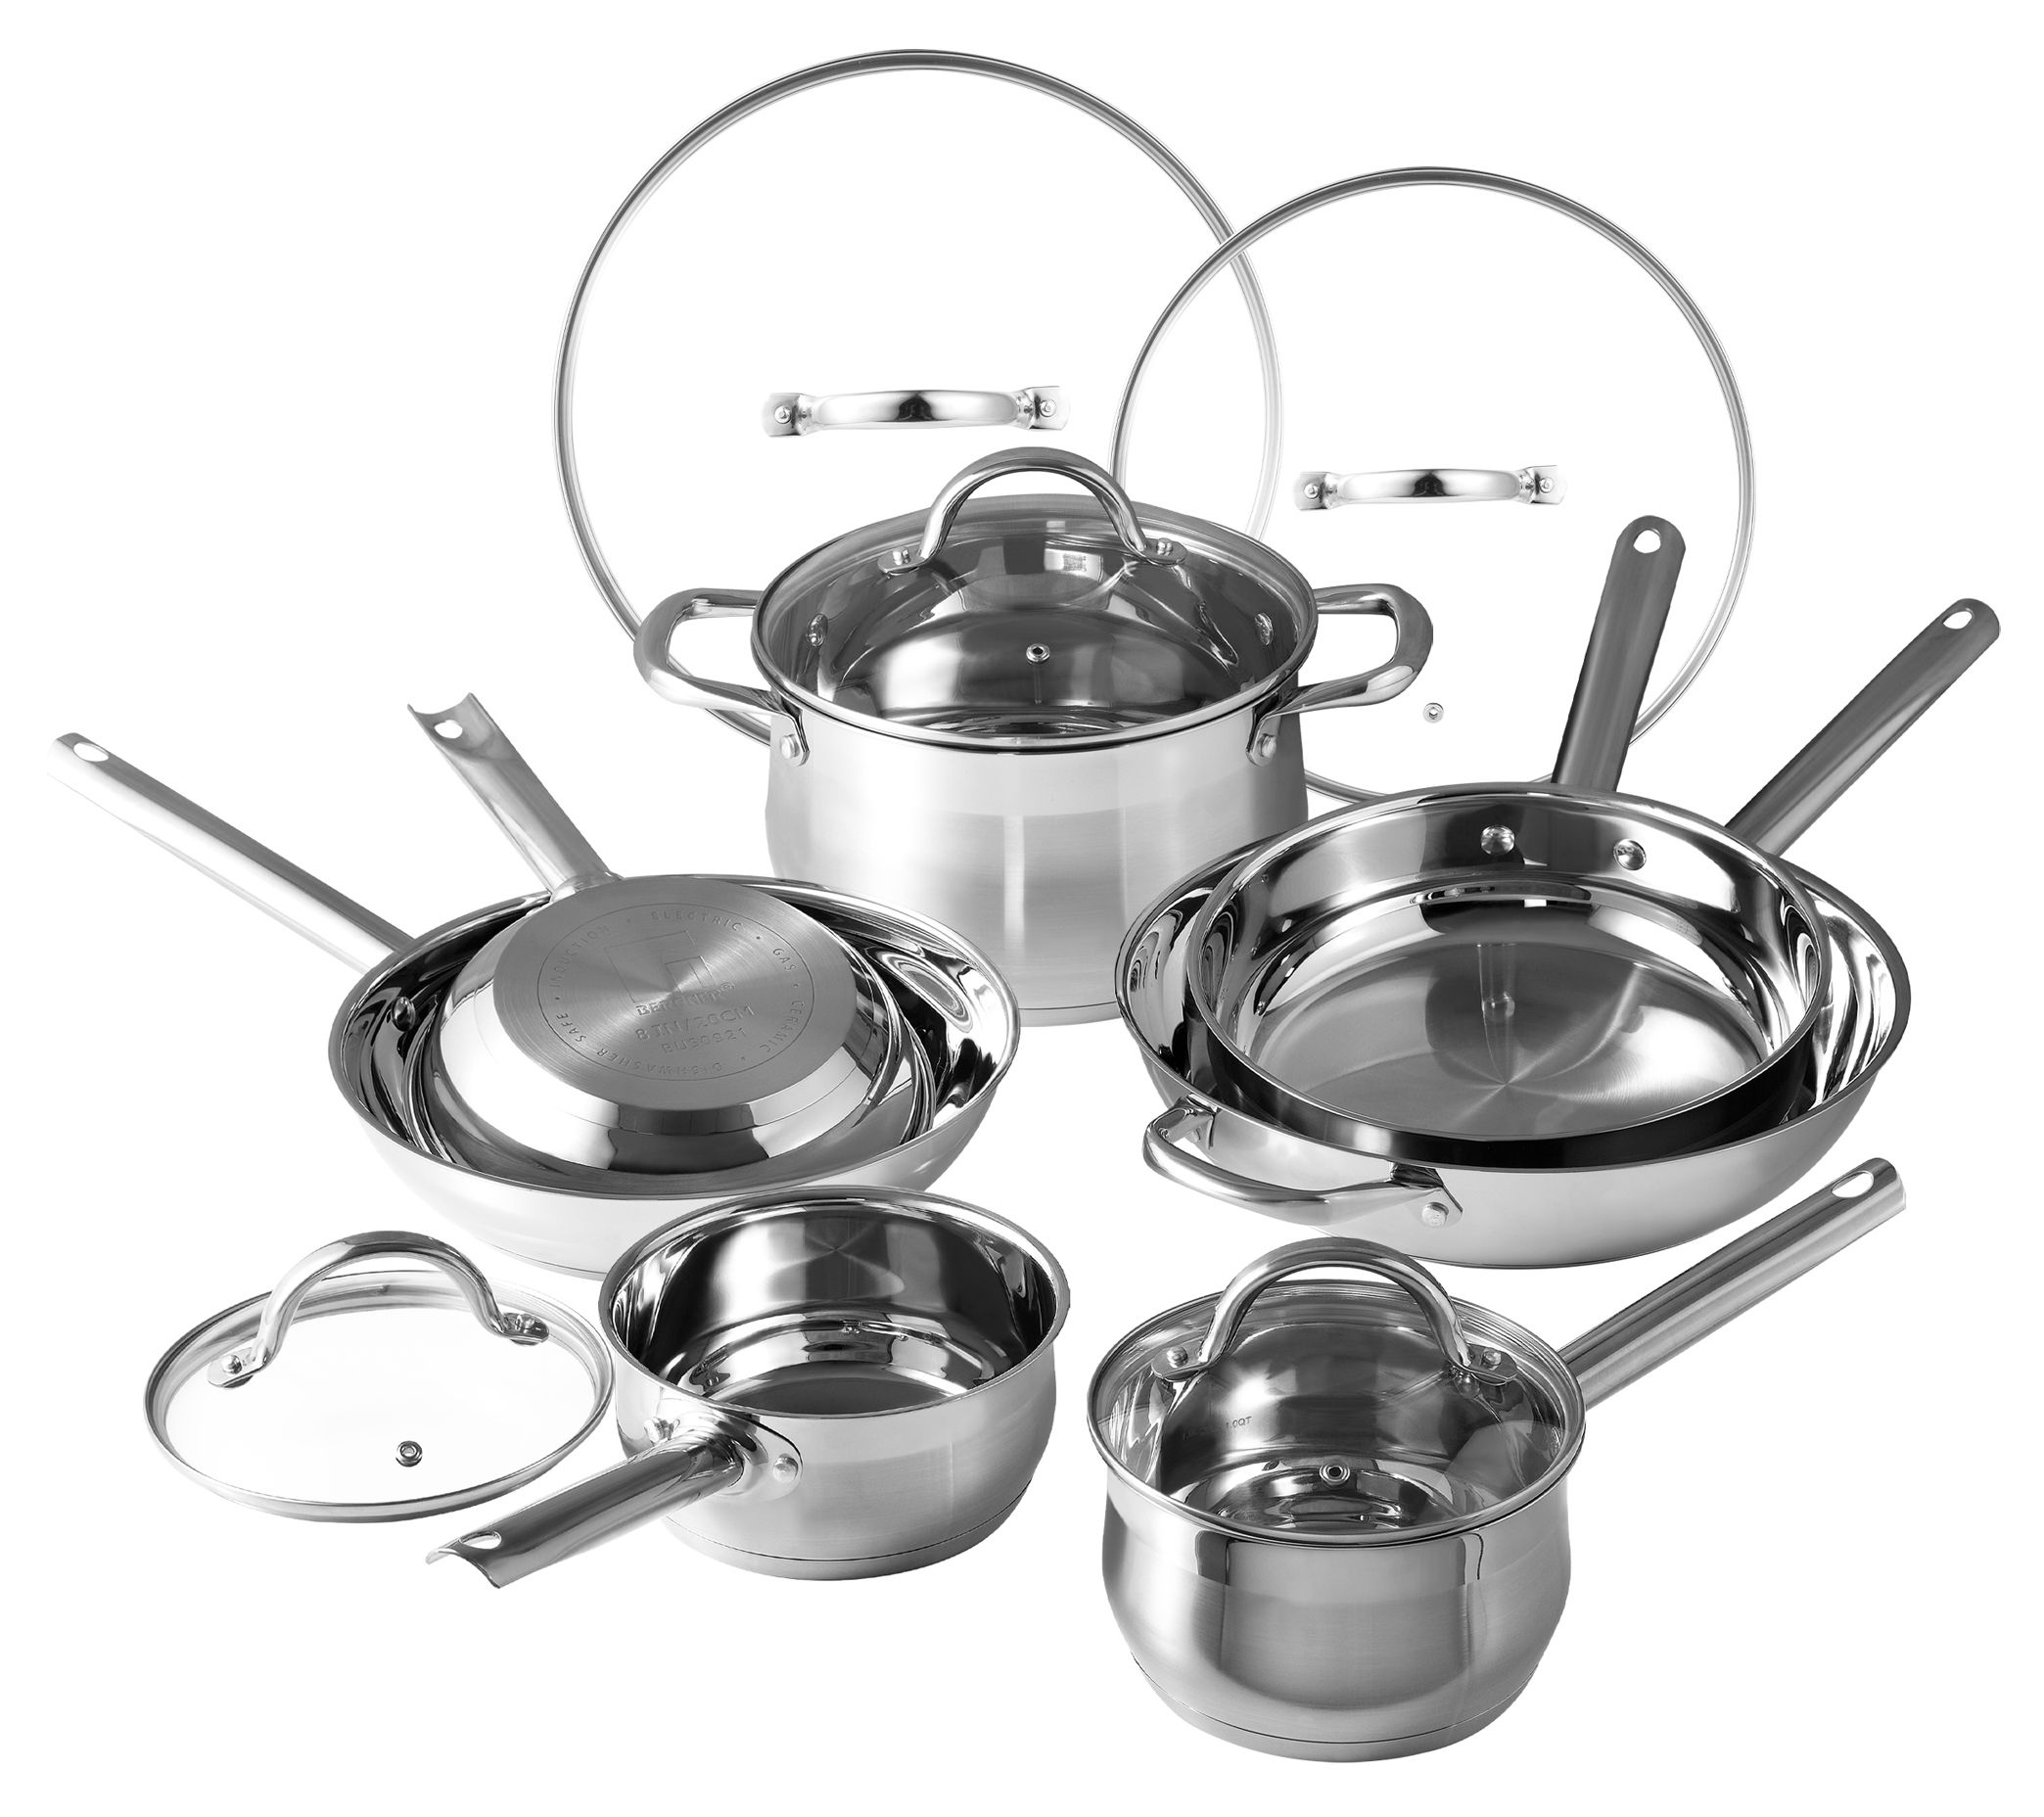 Nonstick Cookware Set, 12 Pieces Healthy Cooking, Vented Lids